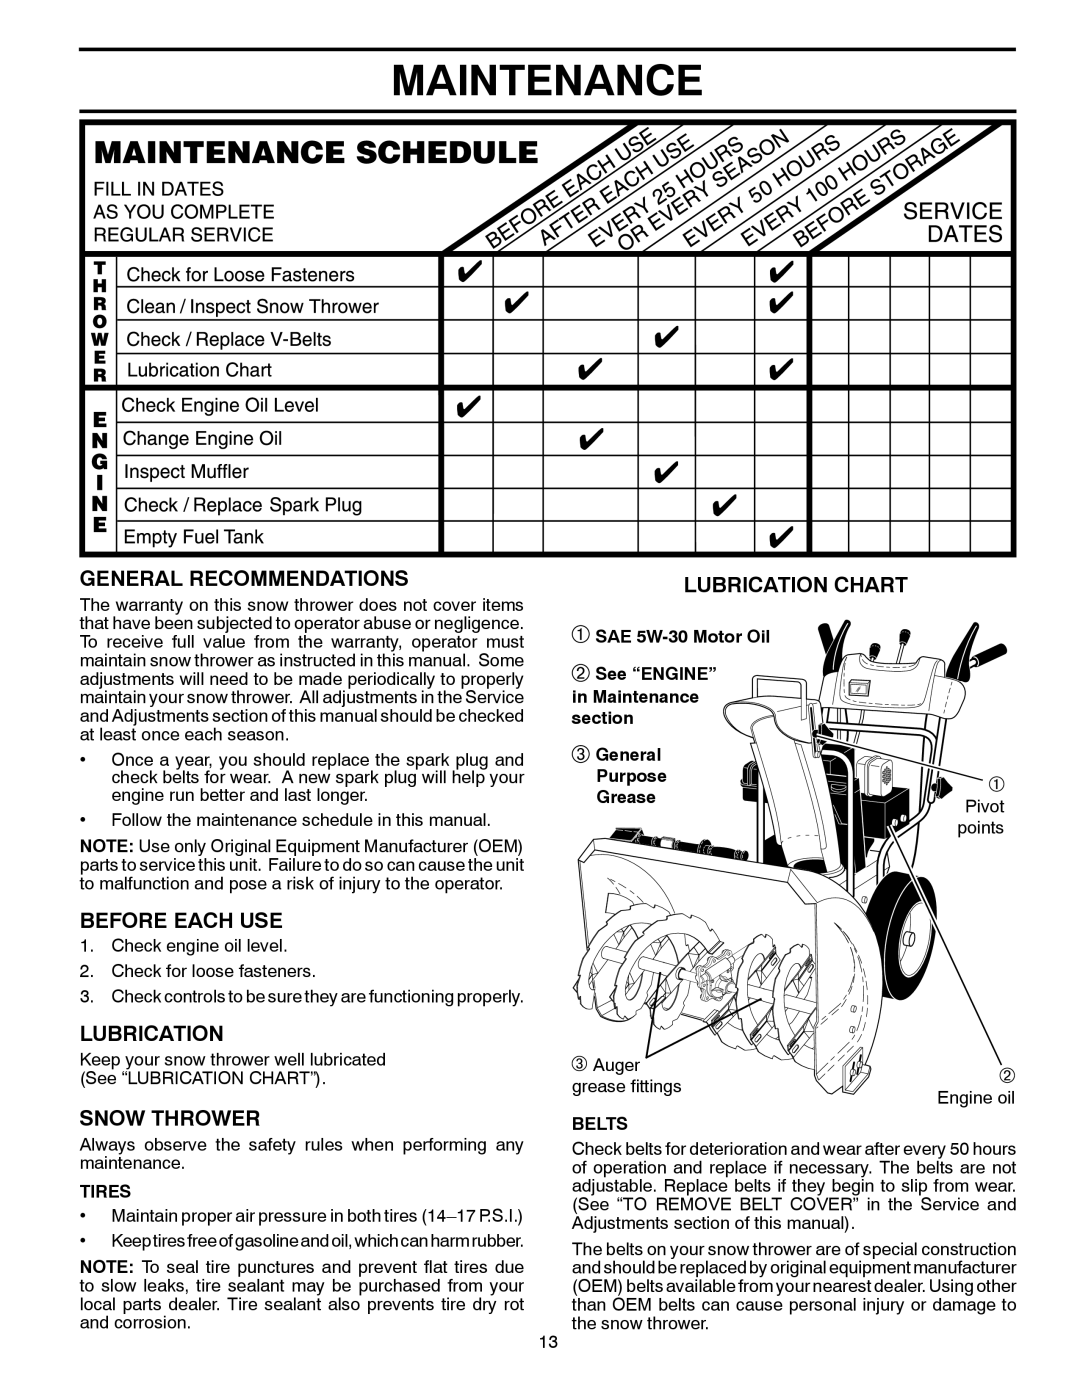 Poulan XT824ES Maintenance, General Recommendations, Before Each Use, Snow Thrower, Lubrication Chart, Tires, Purpose 